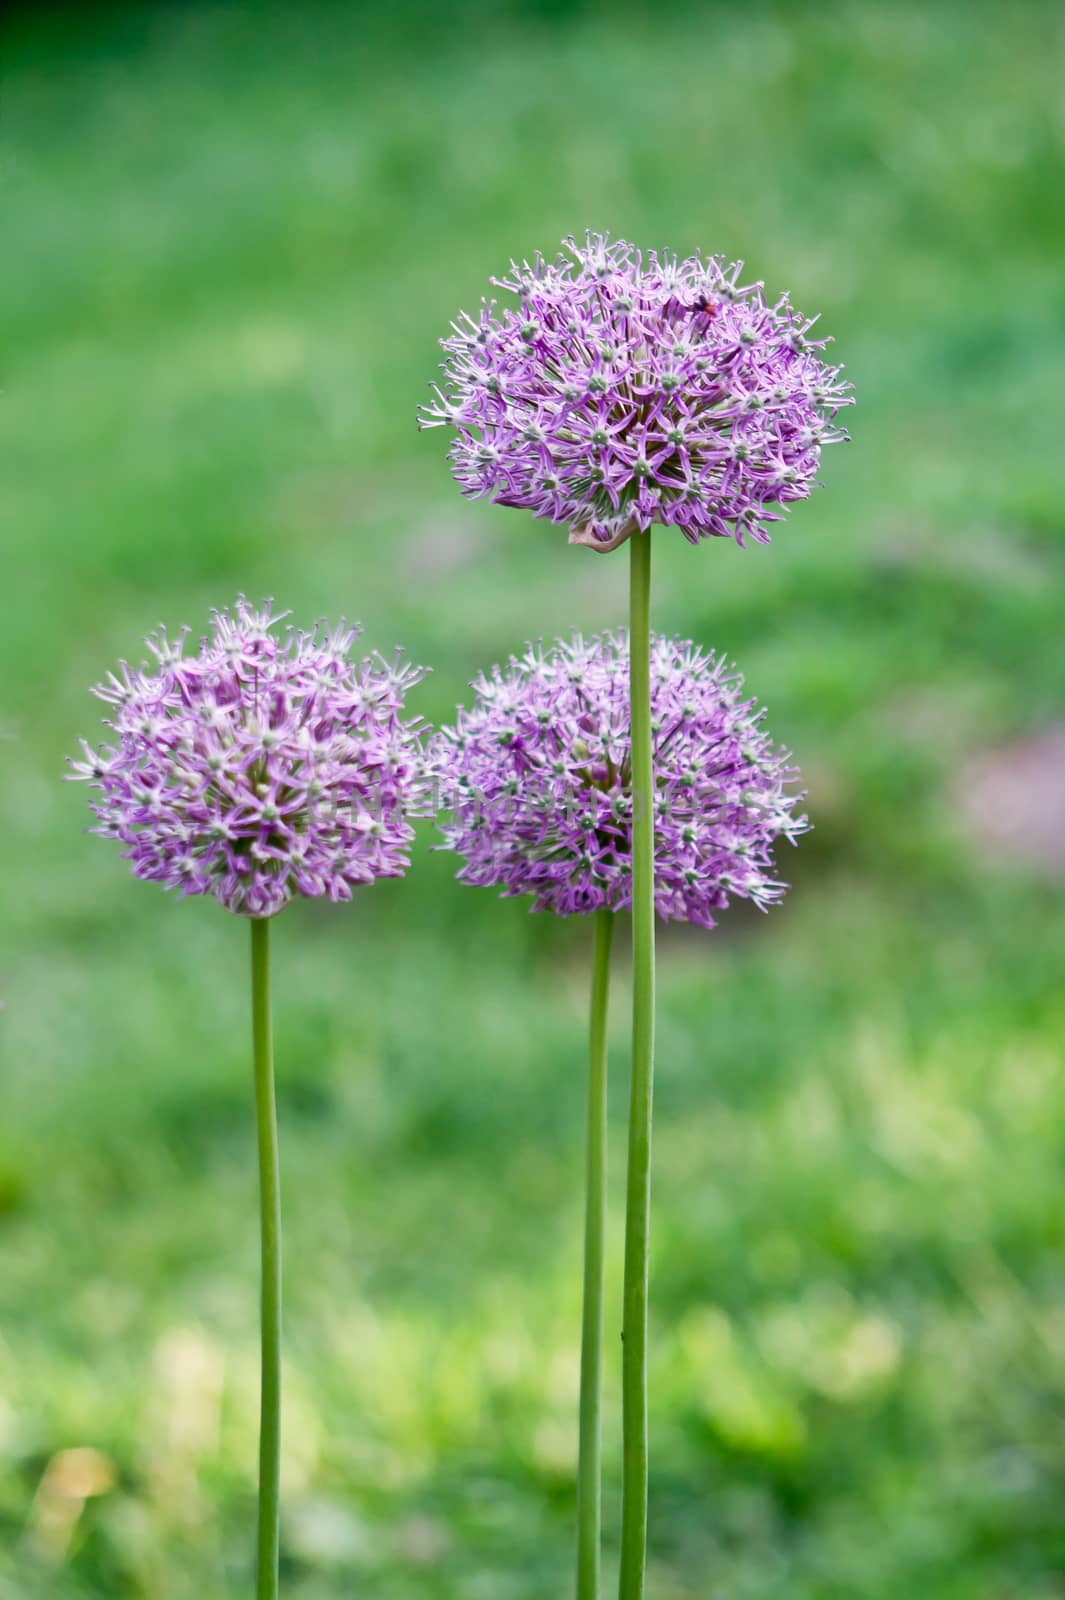 The ornamental onions in the spring flower garden ornament.